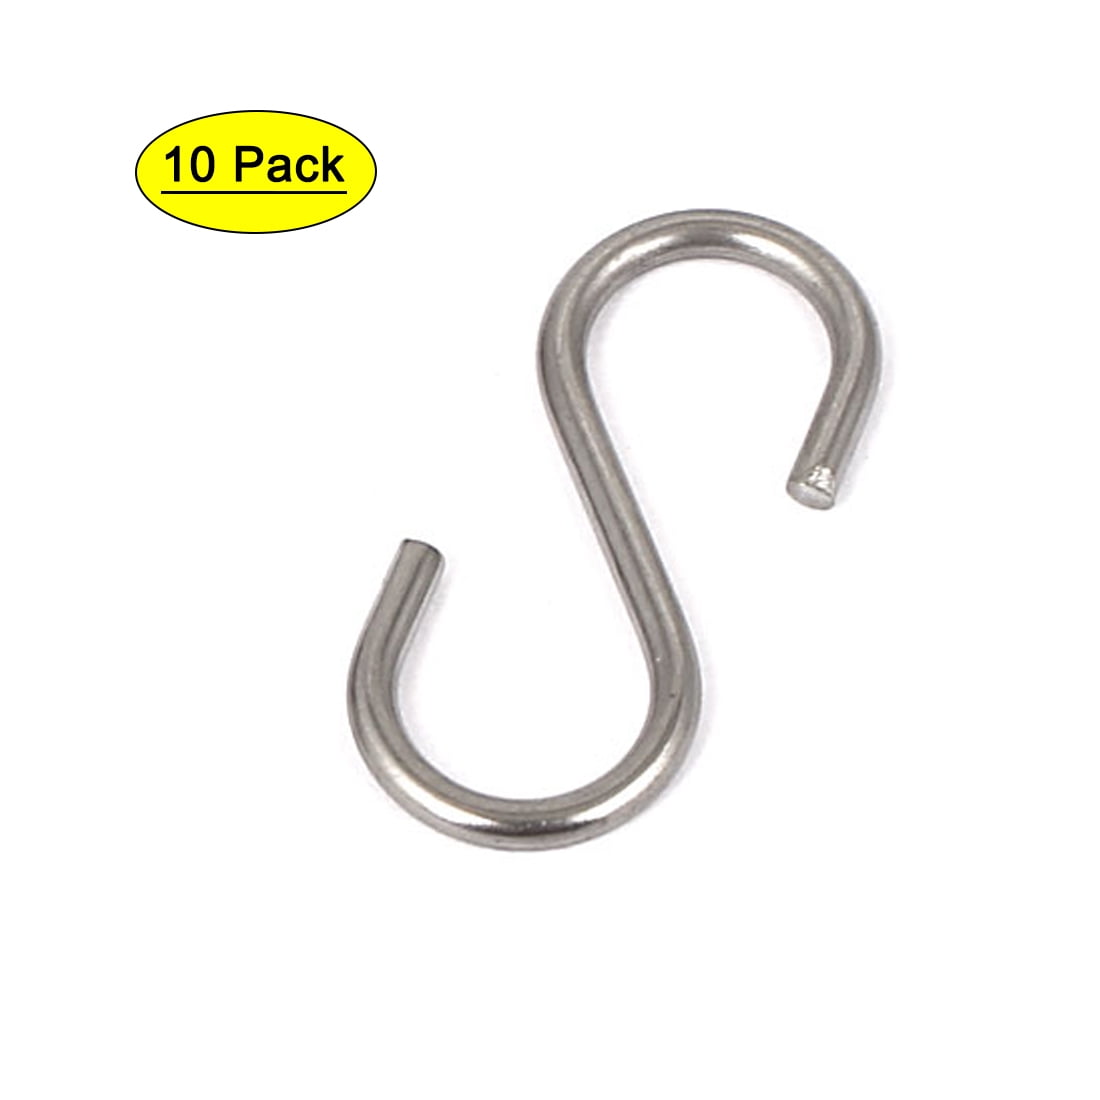 Kitchen and Workspace Organization 12 Inch S-Shaped Hanging Hooks Pack of 5 Stainless Steel Silver Metal